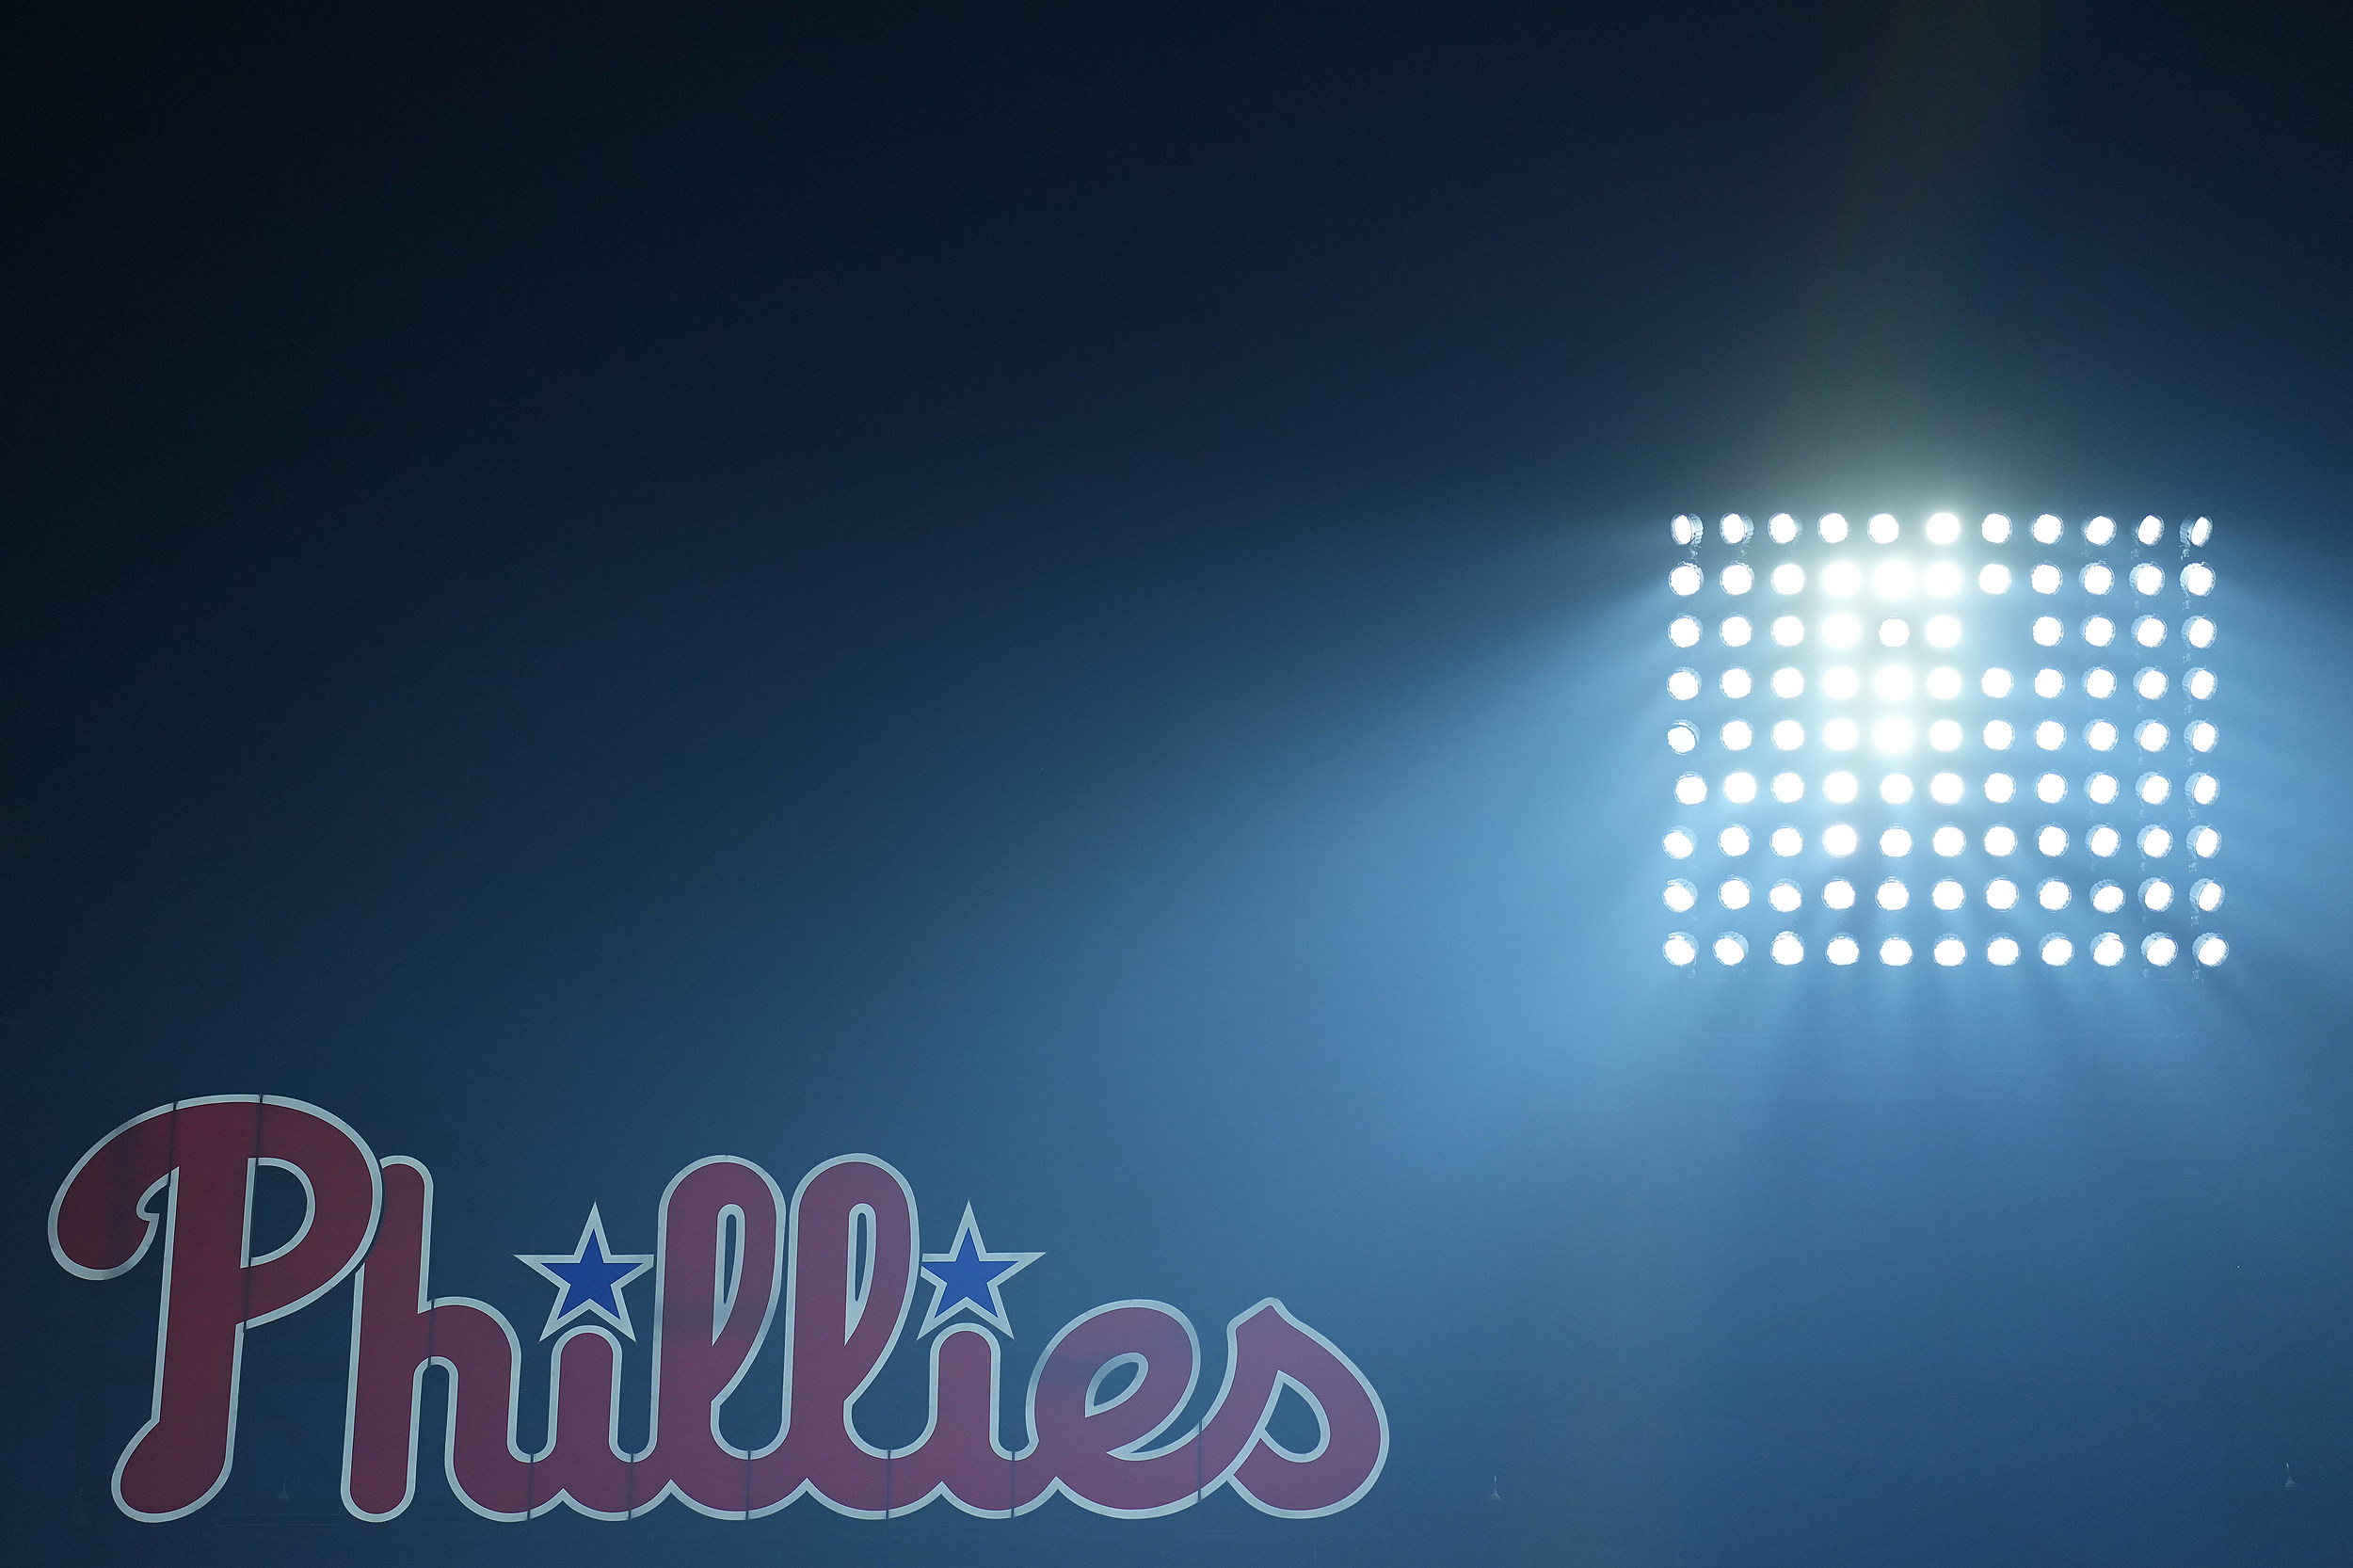 The Yankees will host the Phillies today…at Citizens Bank Park